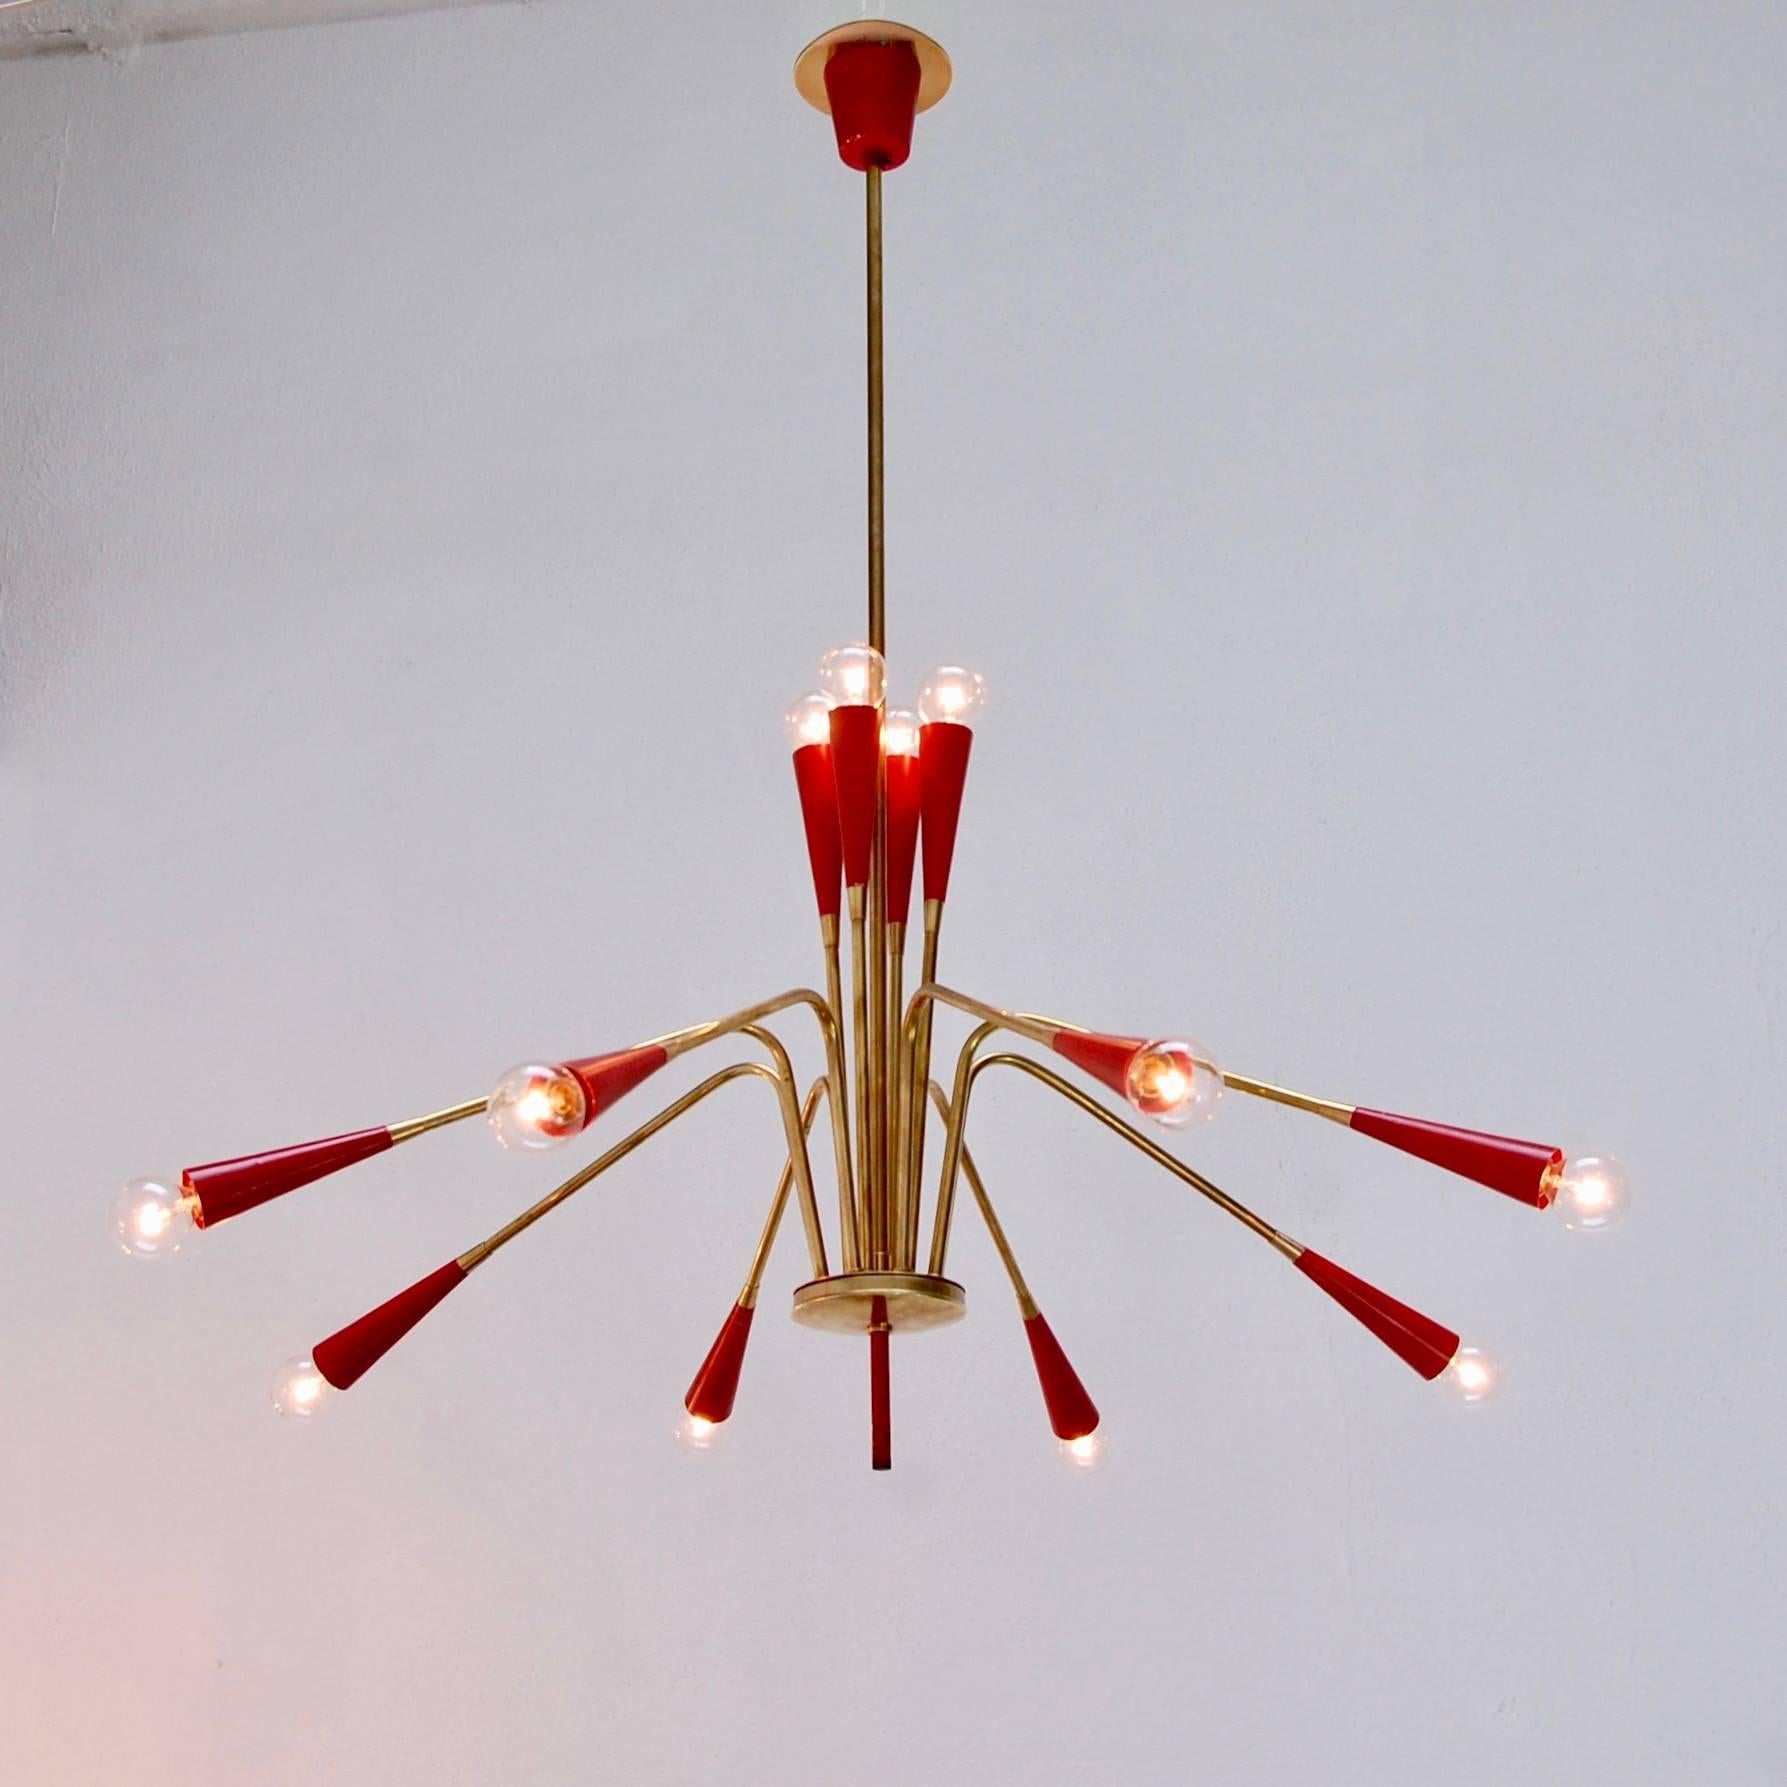 Stunning twelve-light Italian Sputnik light fixture from the 1950s. Original brass finish and painted aluminum finish in red. Rewired for use in the US. Candelabra based E12 sockets. 
Measures: Fixture height 18”
Diameter 30”
OAD 35”.
 